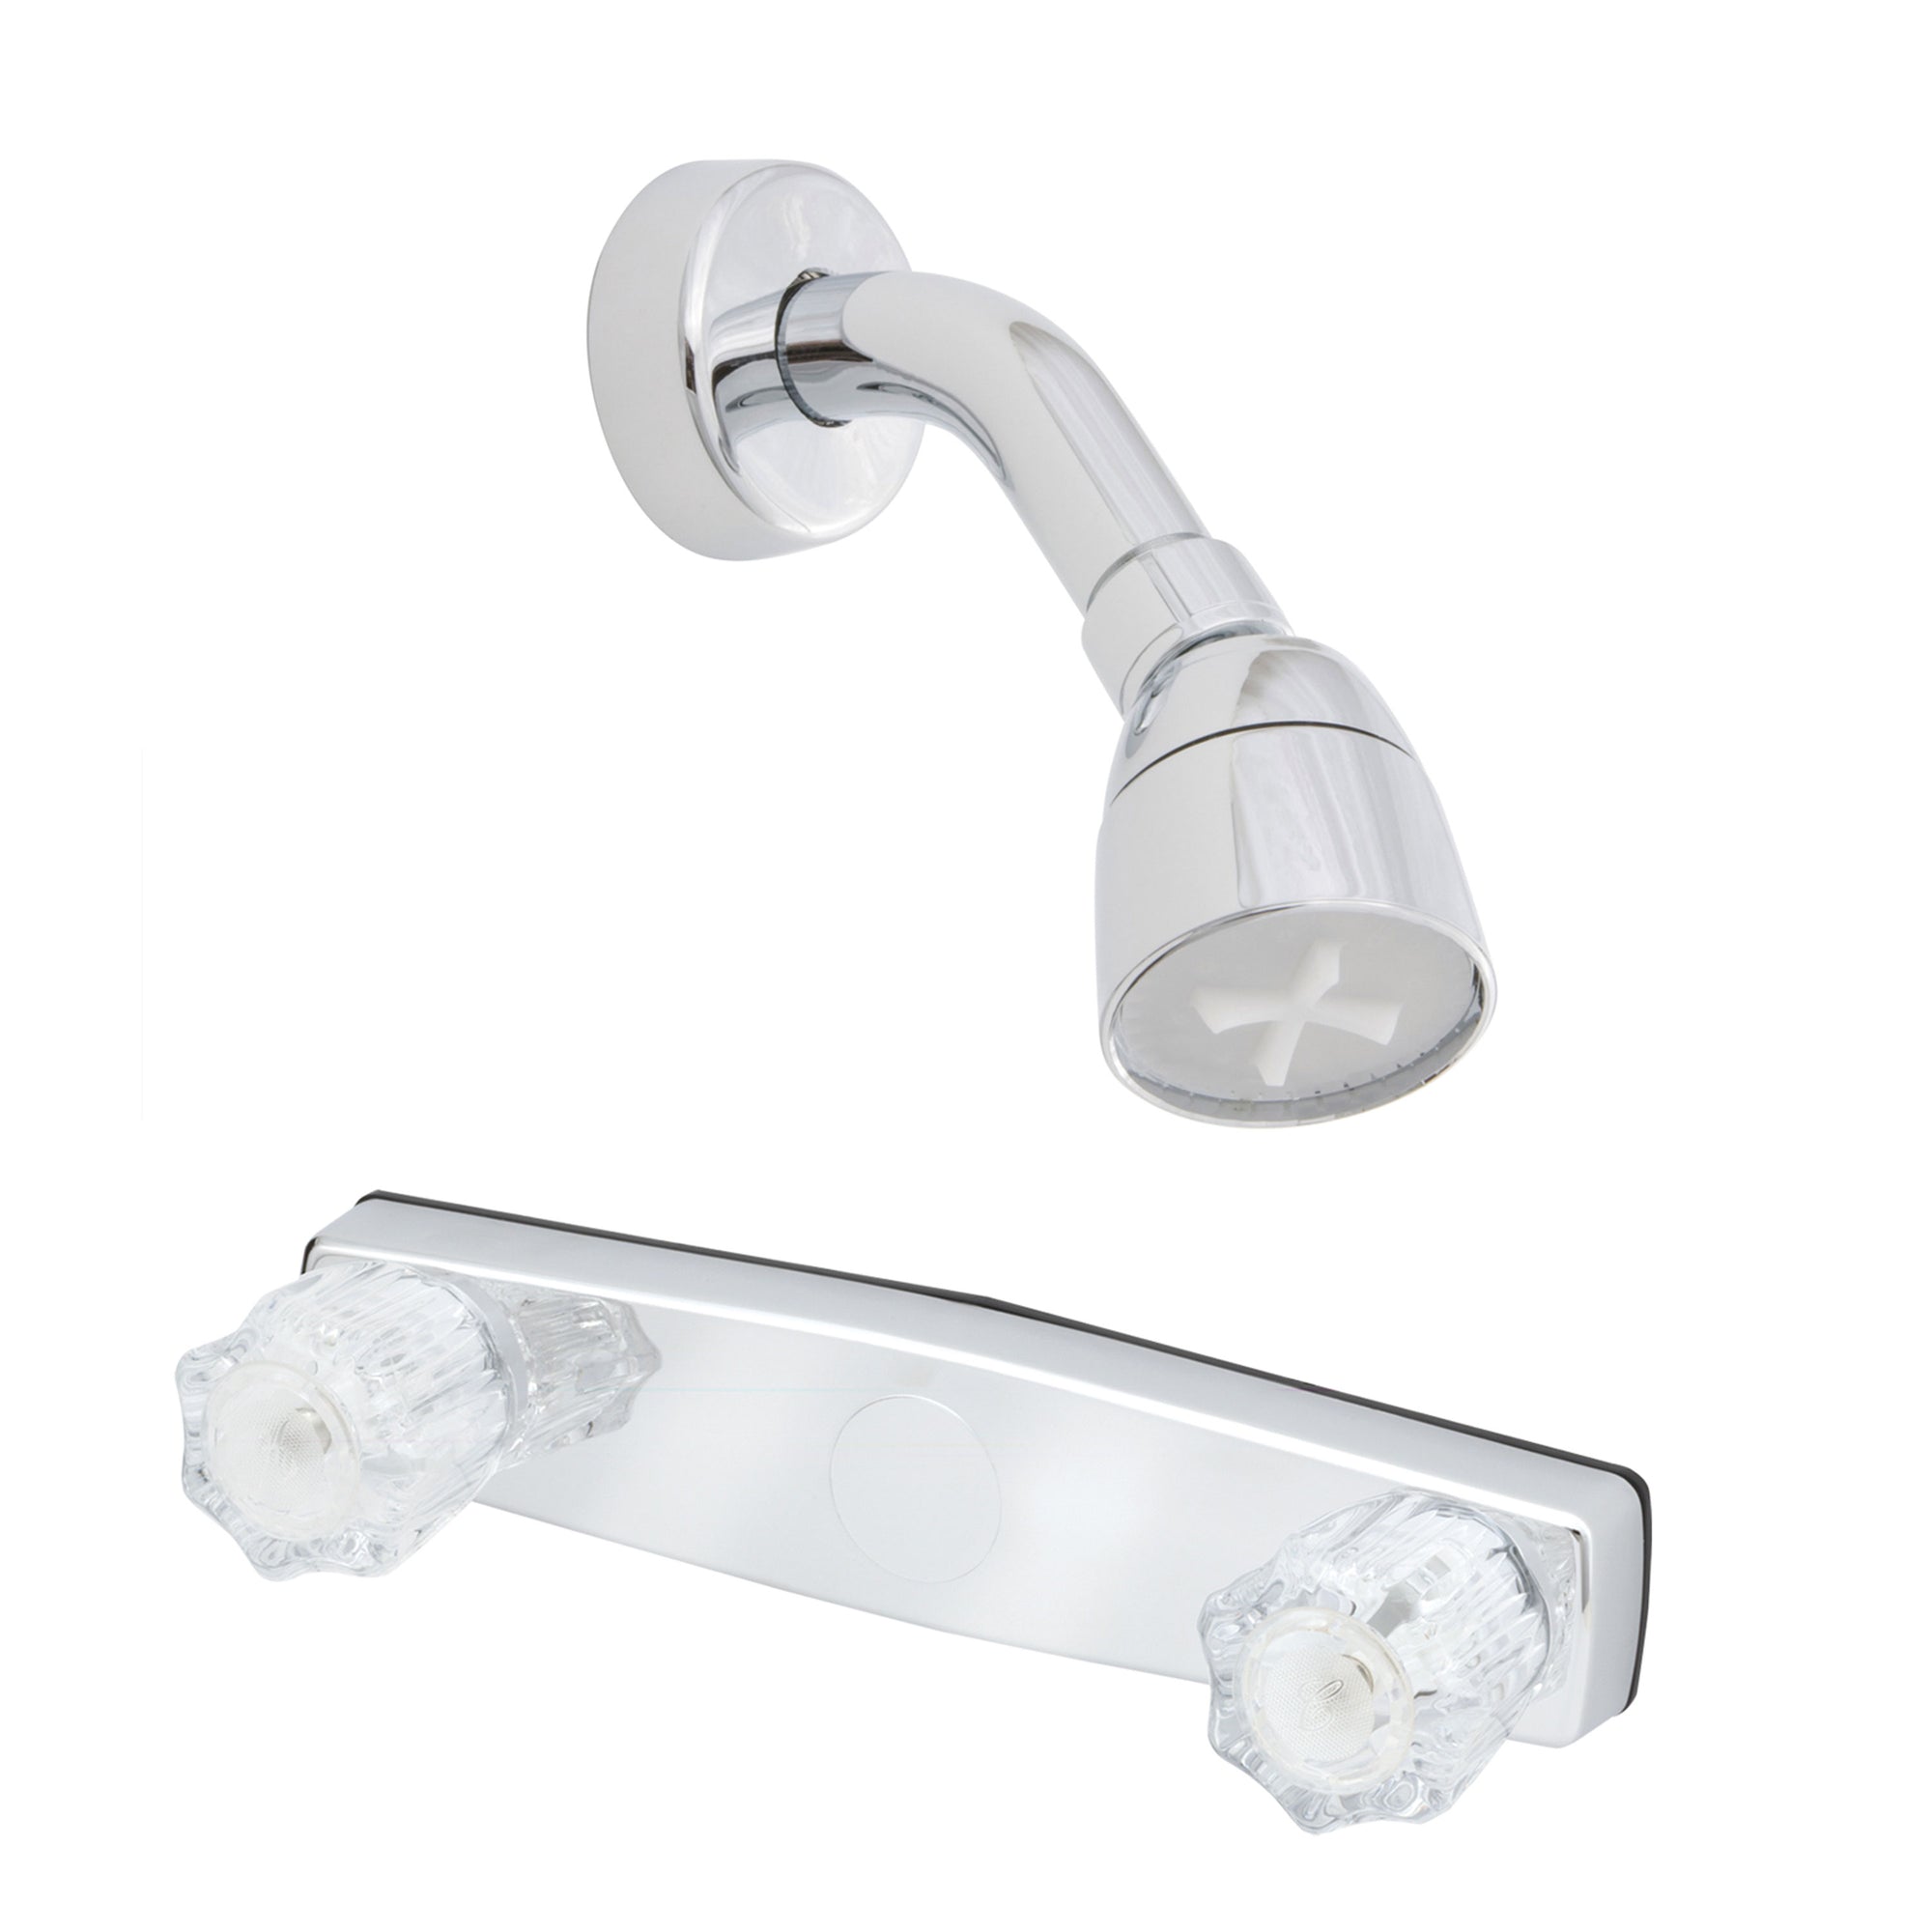 Empire Brass U-YJW59 RV Shower Valve with Crystal Handles and Shower Head - 8", Chrome